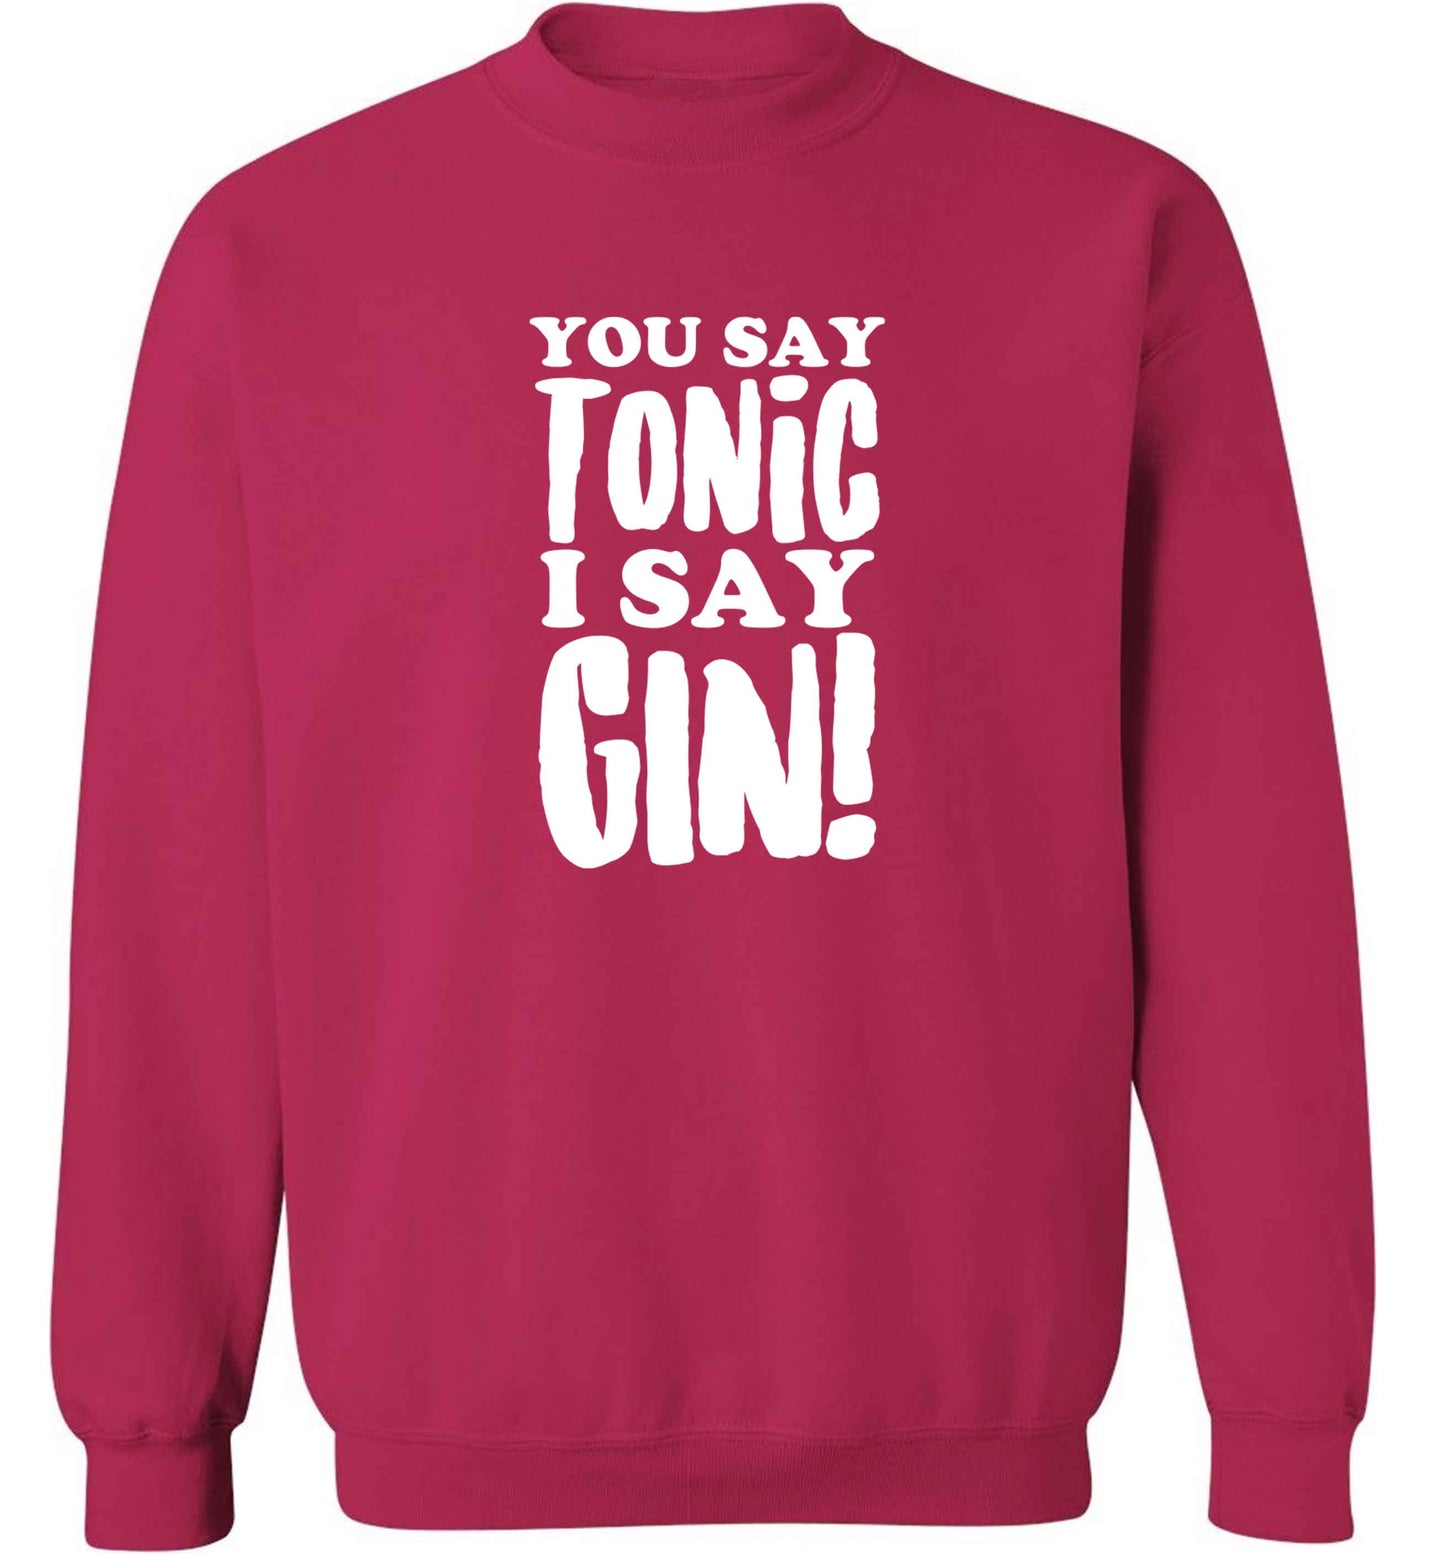 You say tonic I say gin adult's unisex pink sweater 2XL